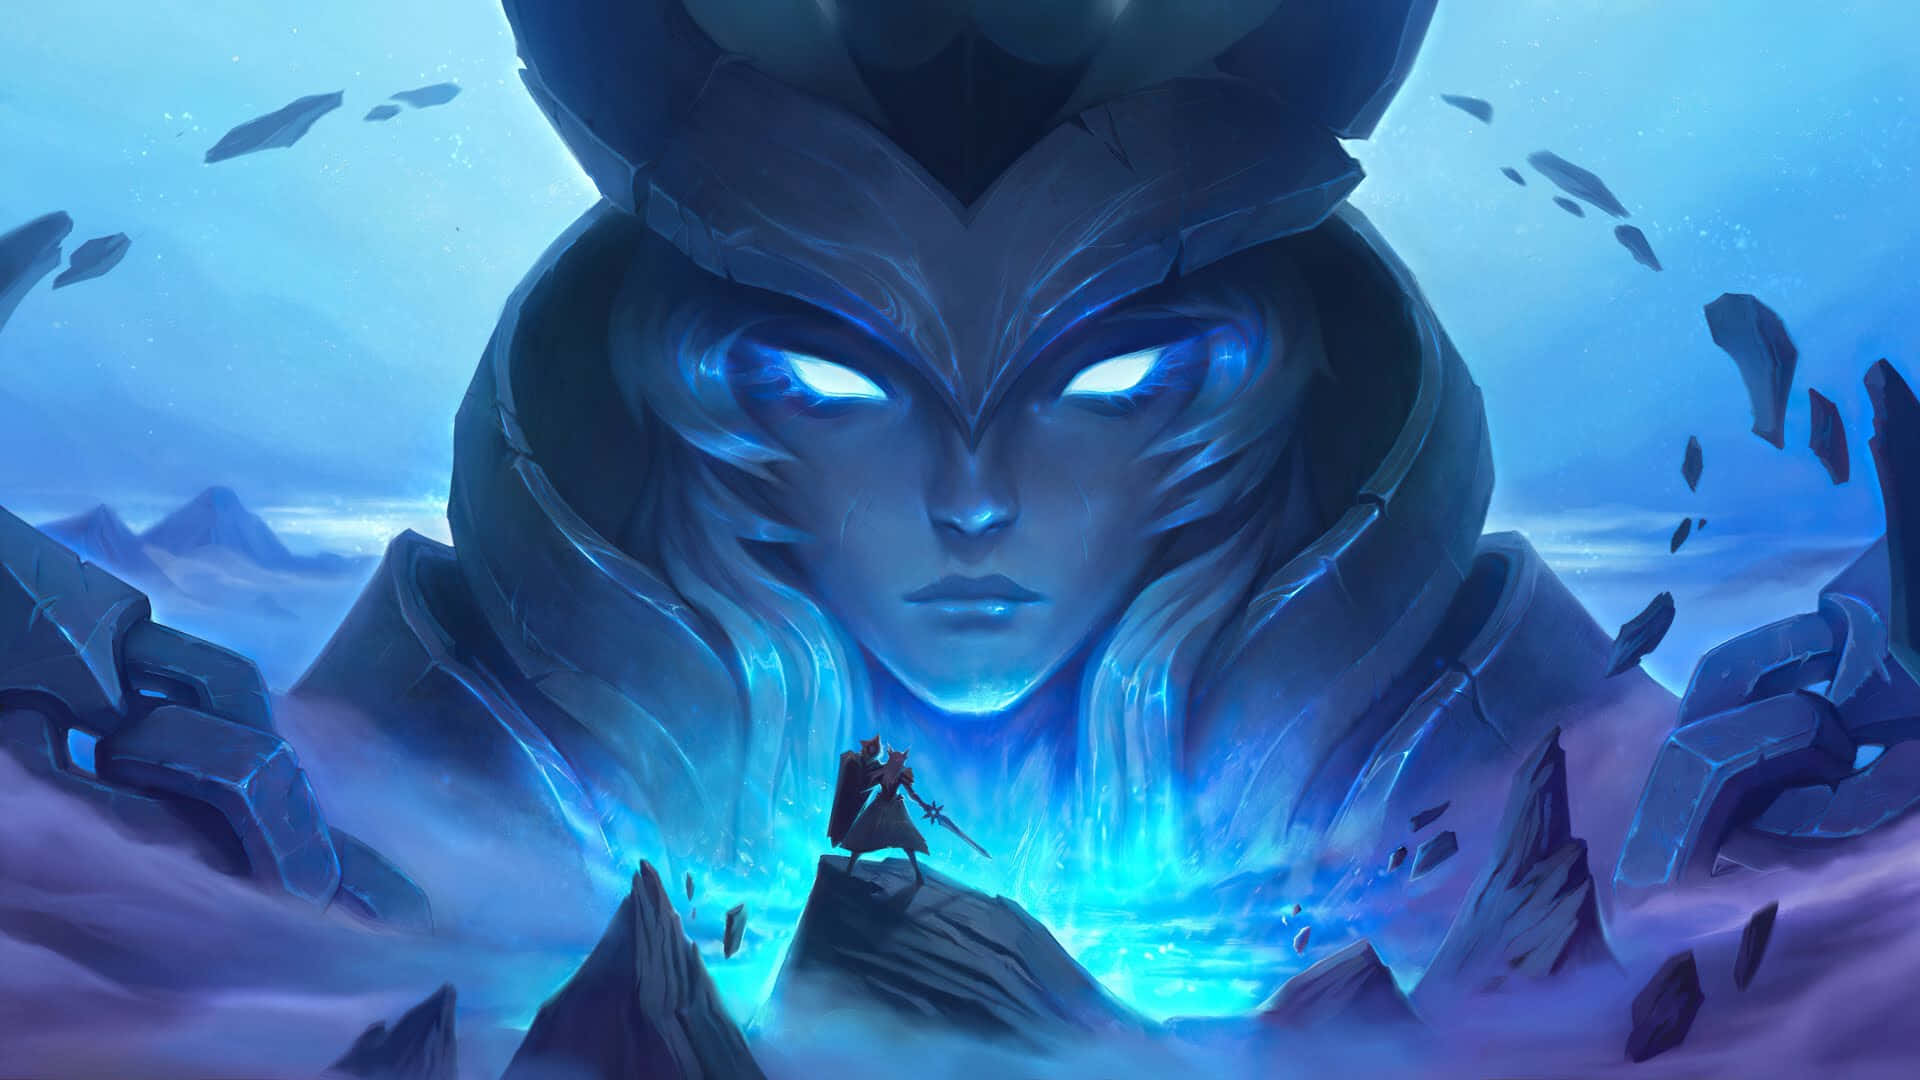 Fight in Style: Get a 1920x1080 League Of Legends Wallpaper